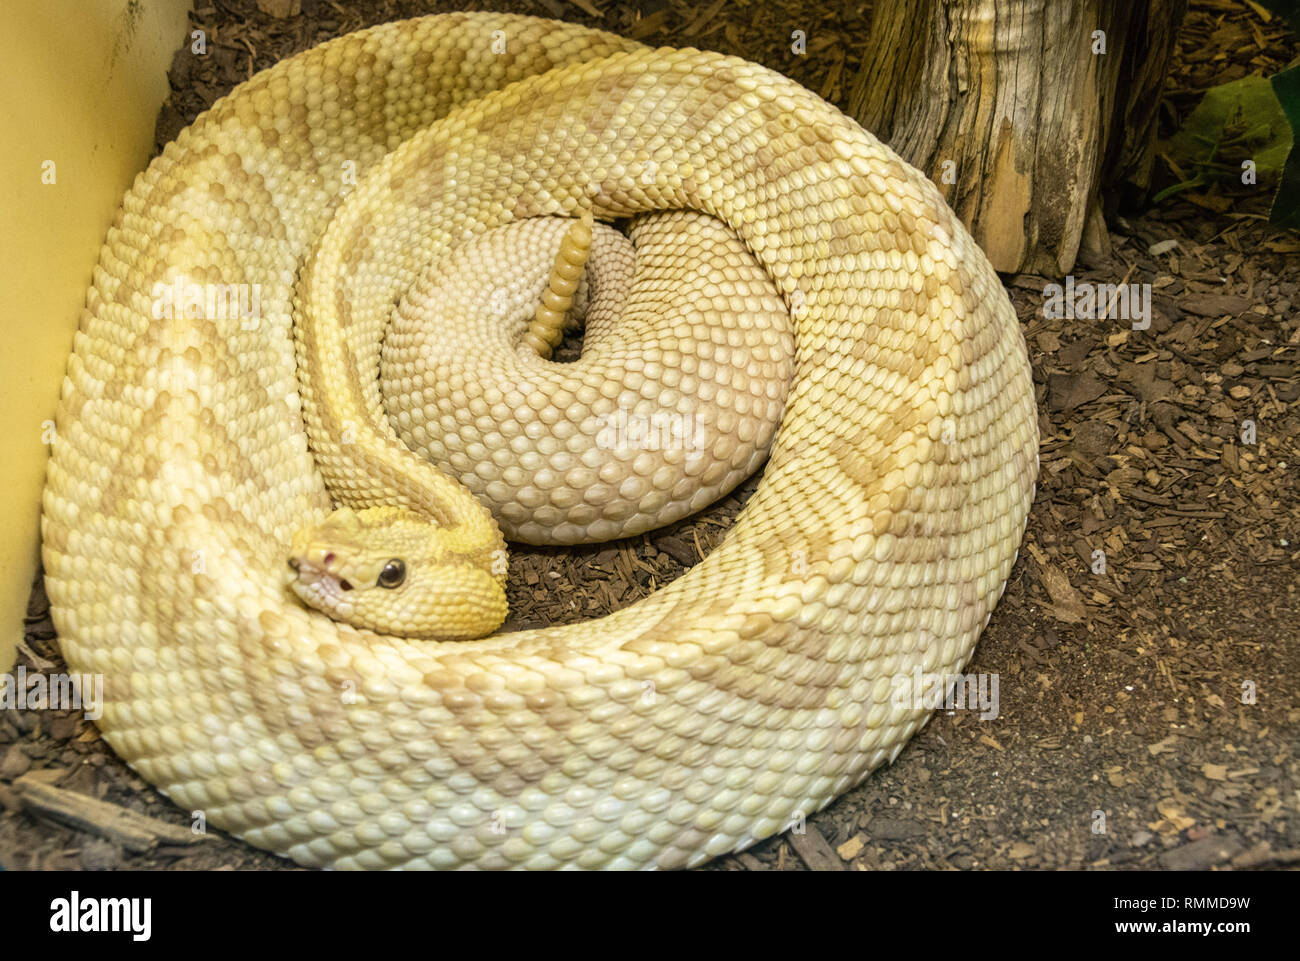 Northwestern Neotropical Rattlesnake (Crotalus simus culminatus) exhibiting color aberration known as xanthism Stock Photo